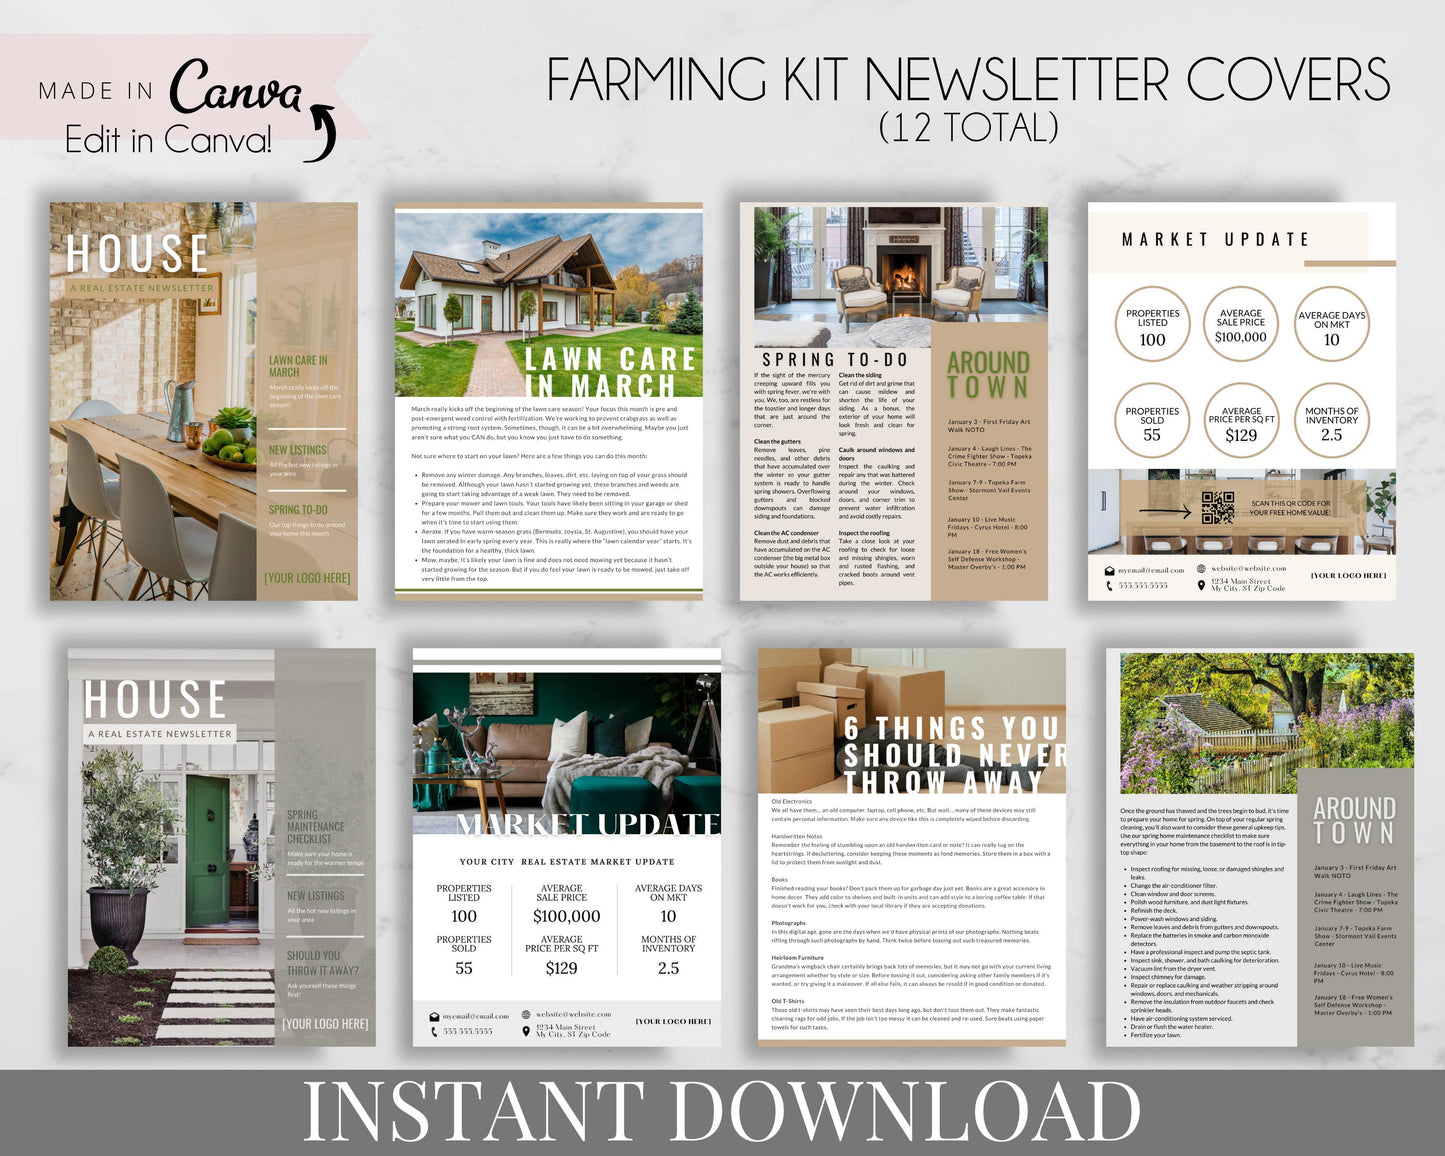 Real Estate Farming Kit Marketing for Realtors, Agents - Instant Download - Newsletter Covers Templates Made in Canva